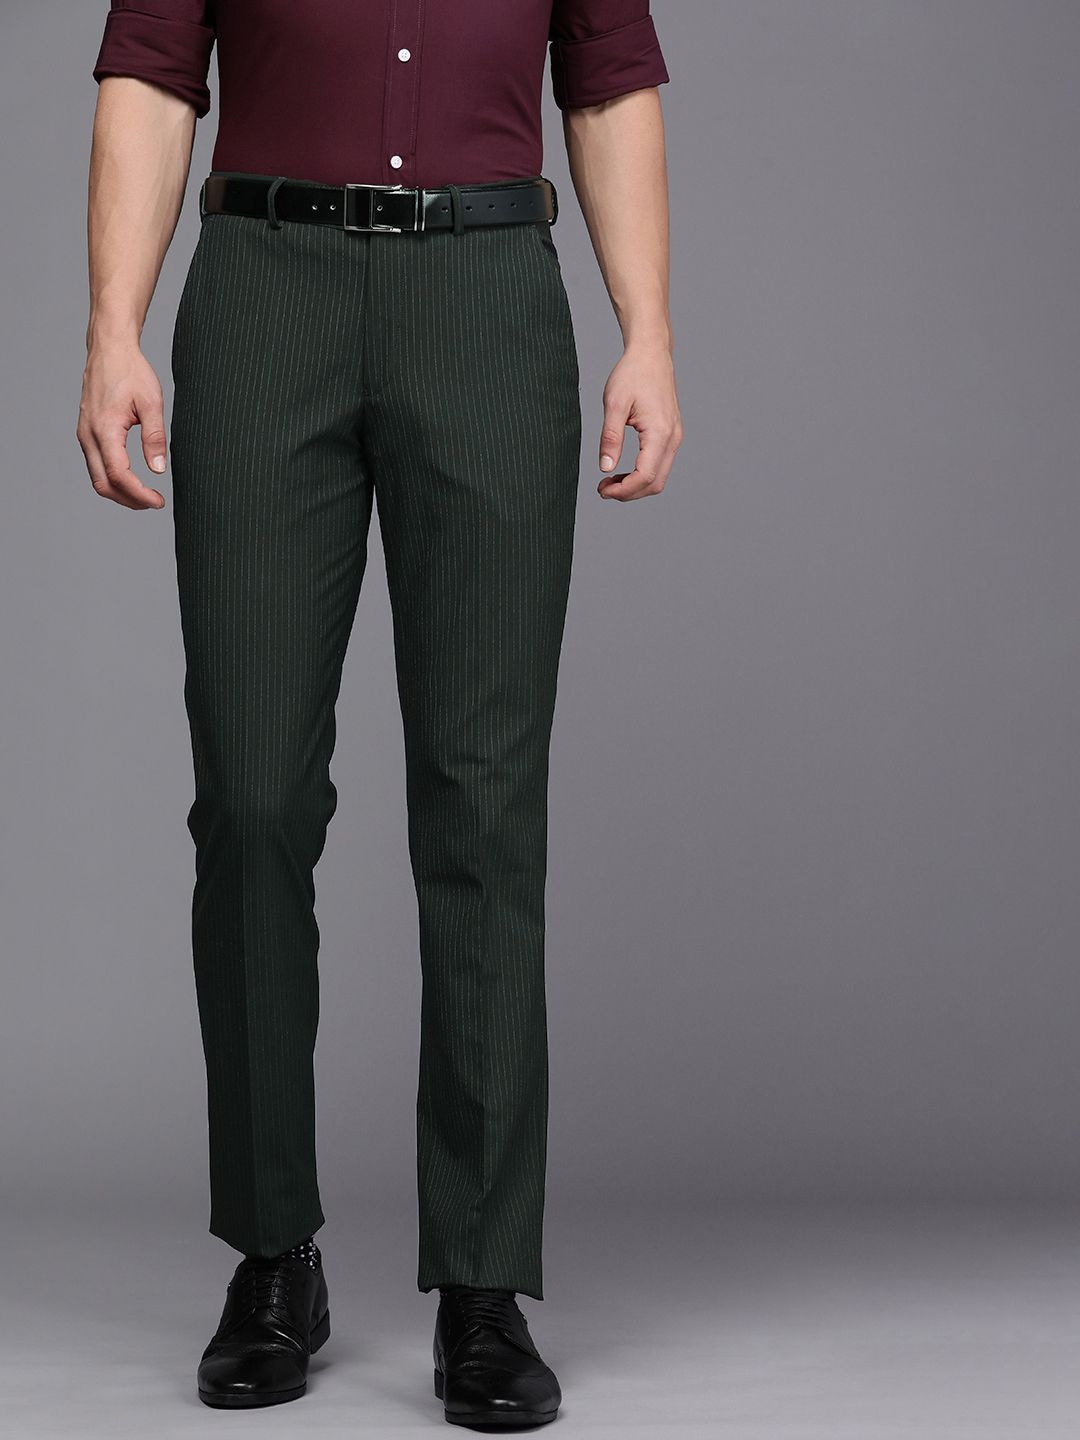 Buy LOUIS PHILIPPE Solid Polyester Blend Slim Fit Men's Work Wear Trousers  | Shoppers Stop